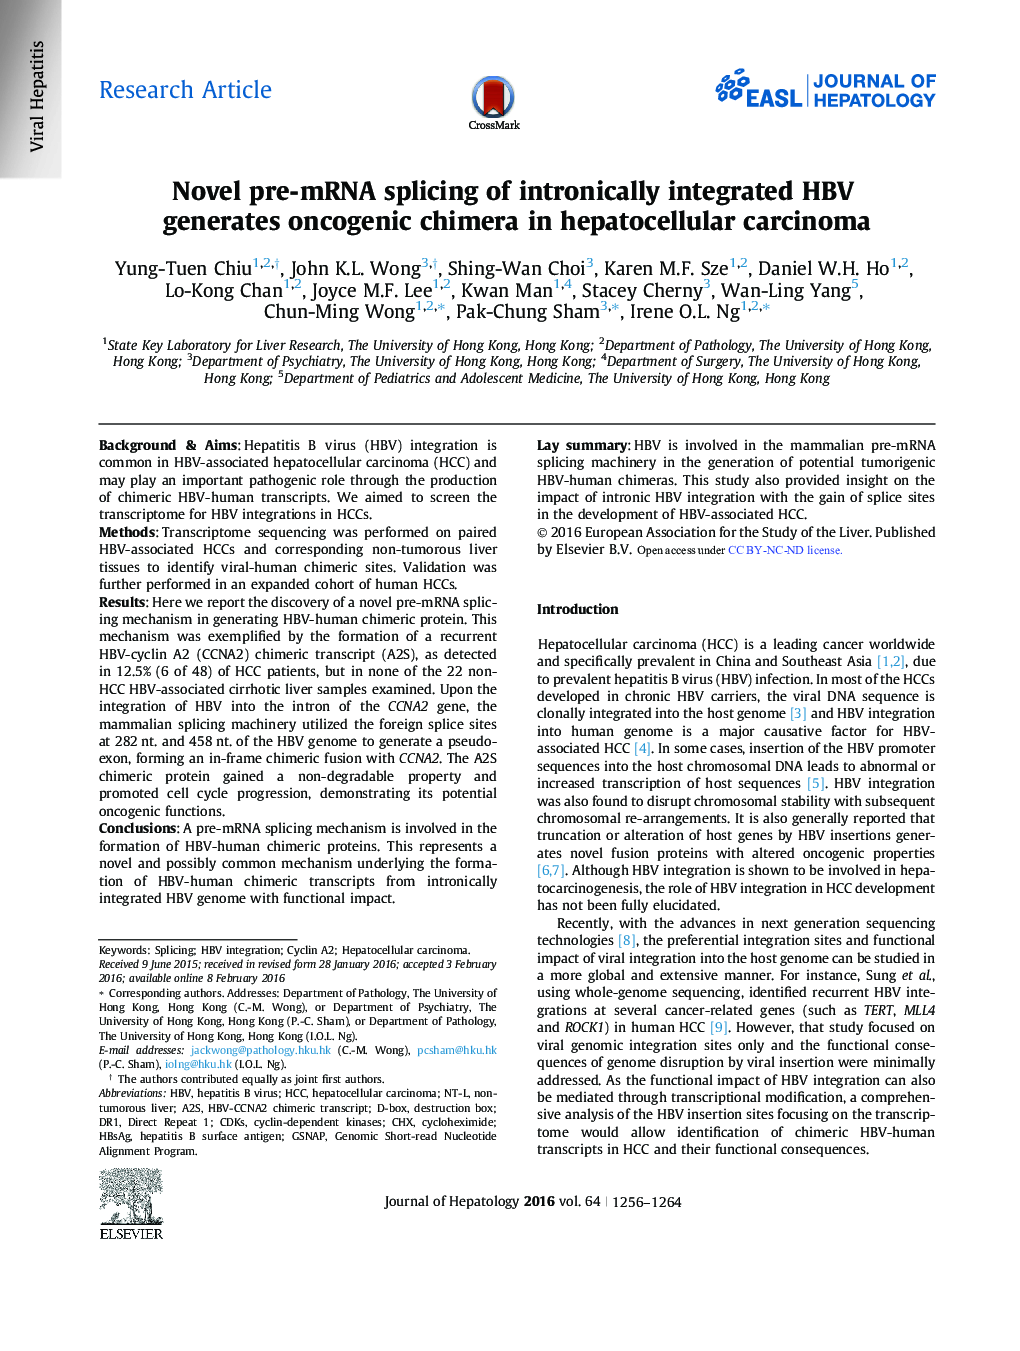 Research ArticleNovel pre-mRNA splicing of intronically integrated HBV generates oncogenic chimera in hepatocellular carcinoma